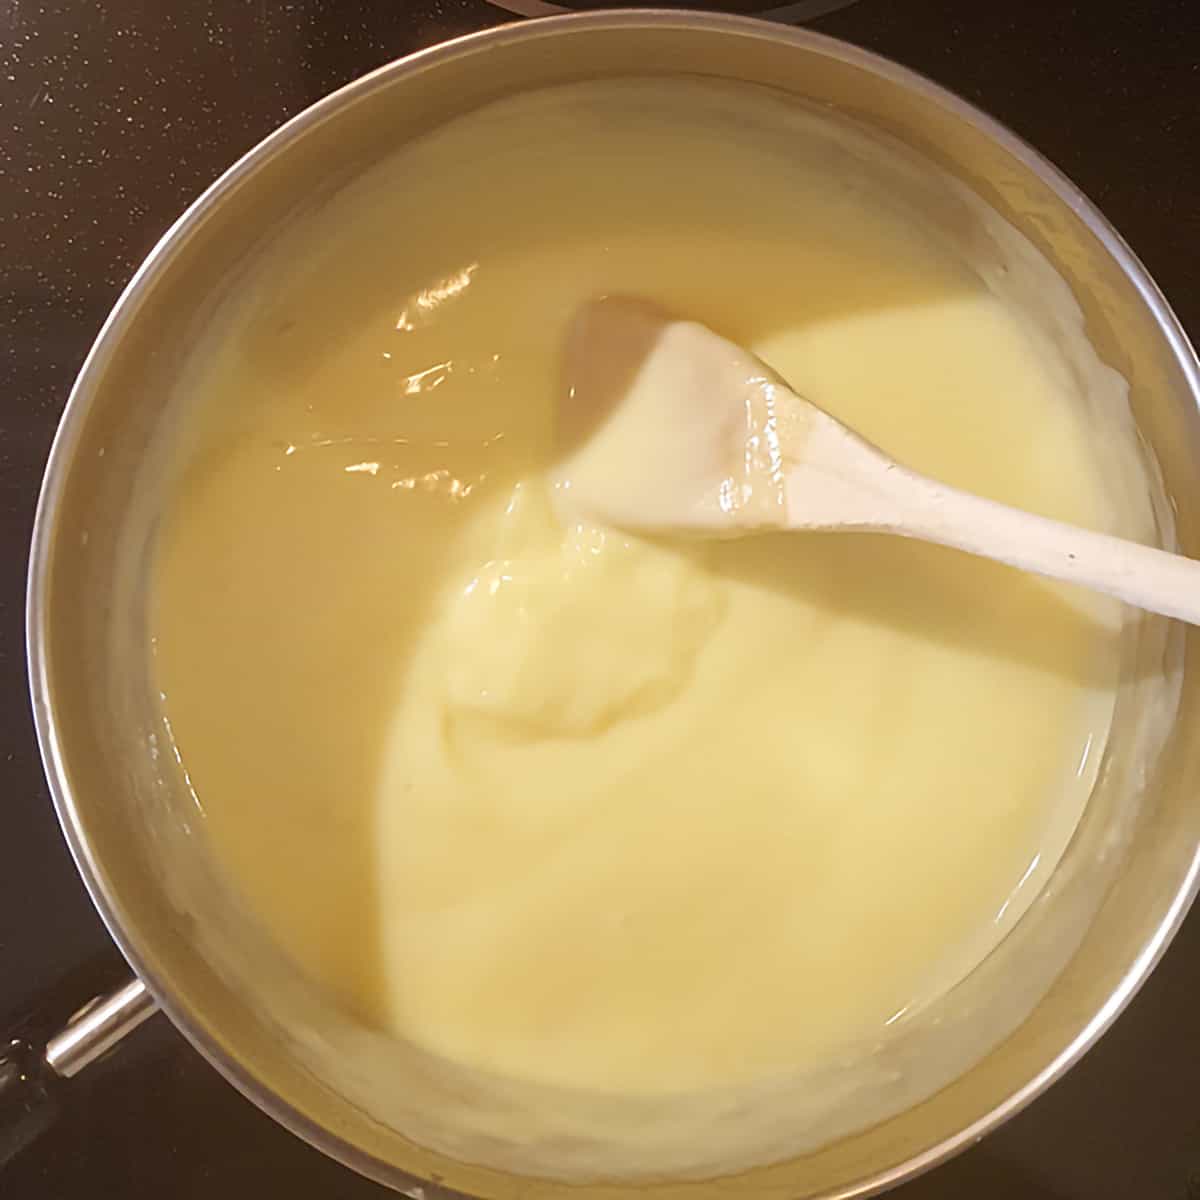 Custard after cooking for 6 to 8 minutes.